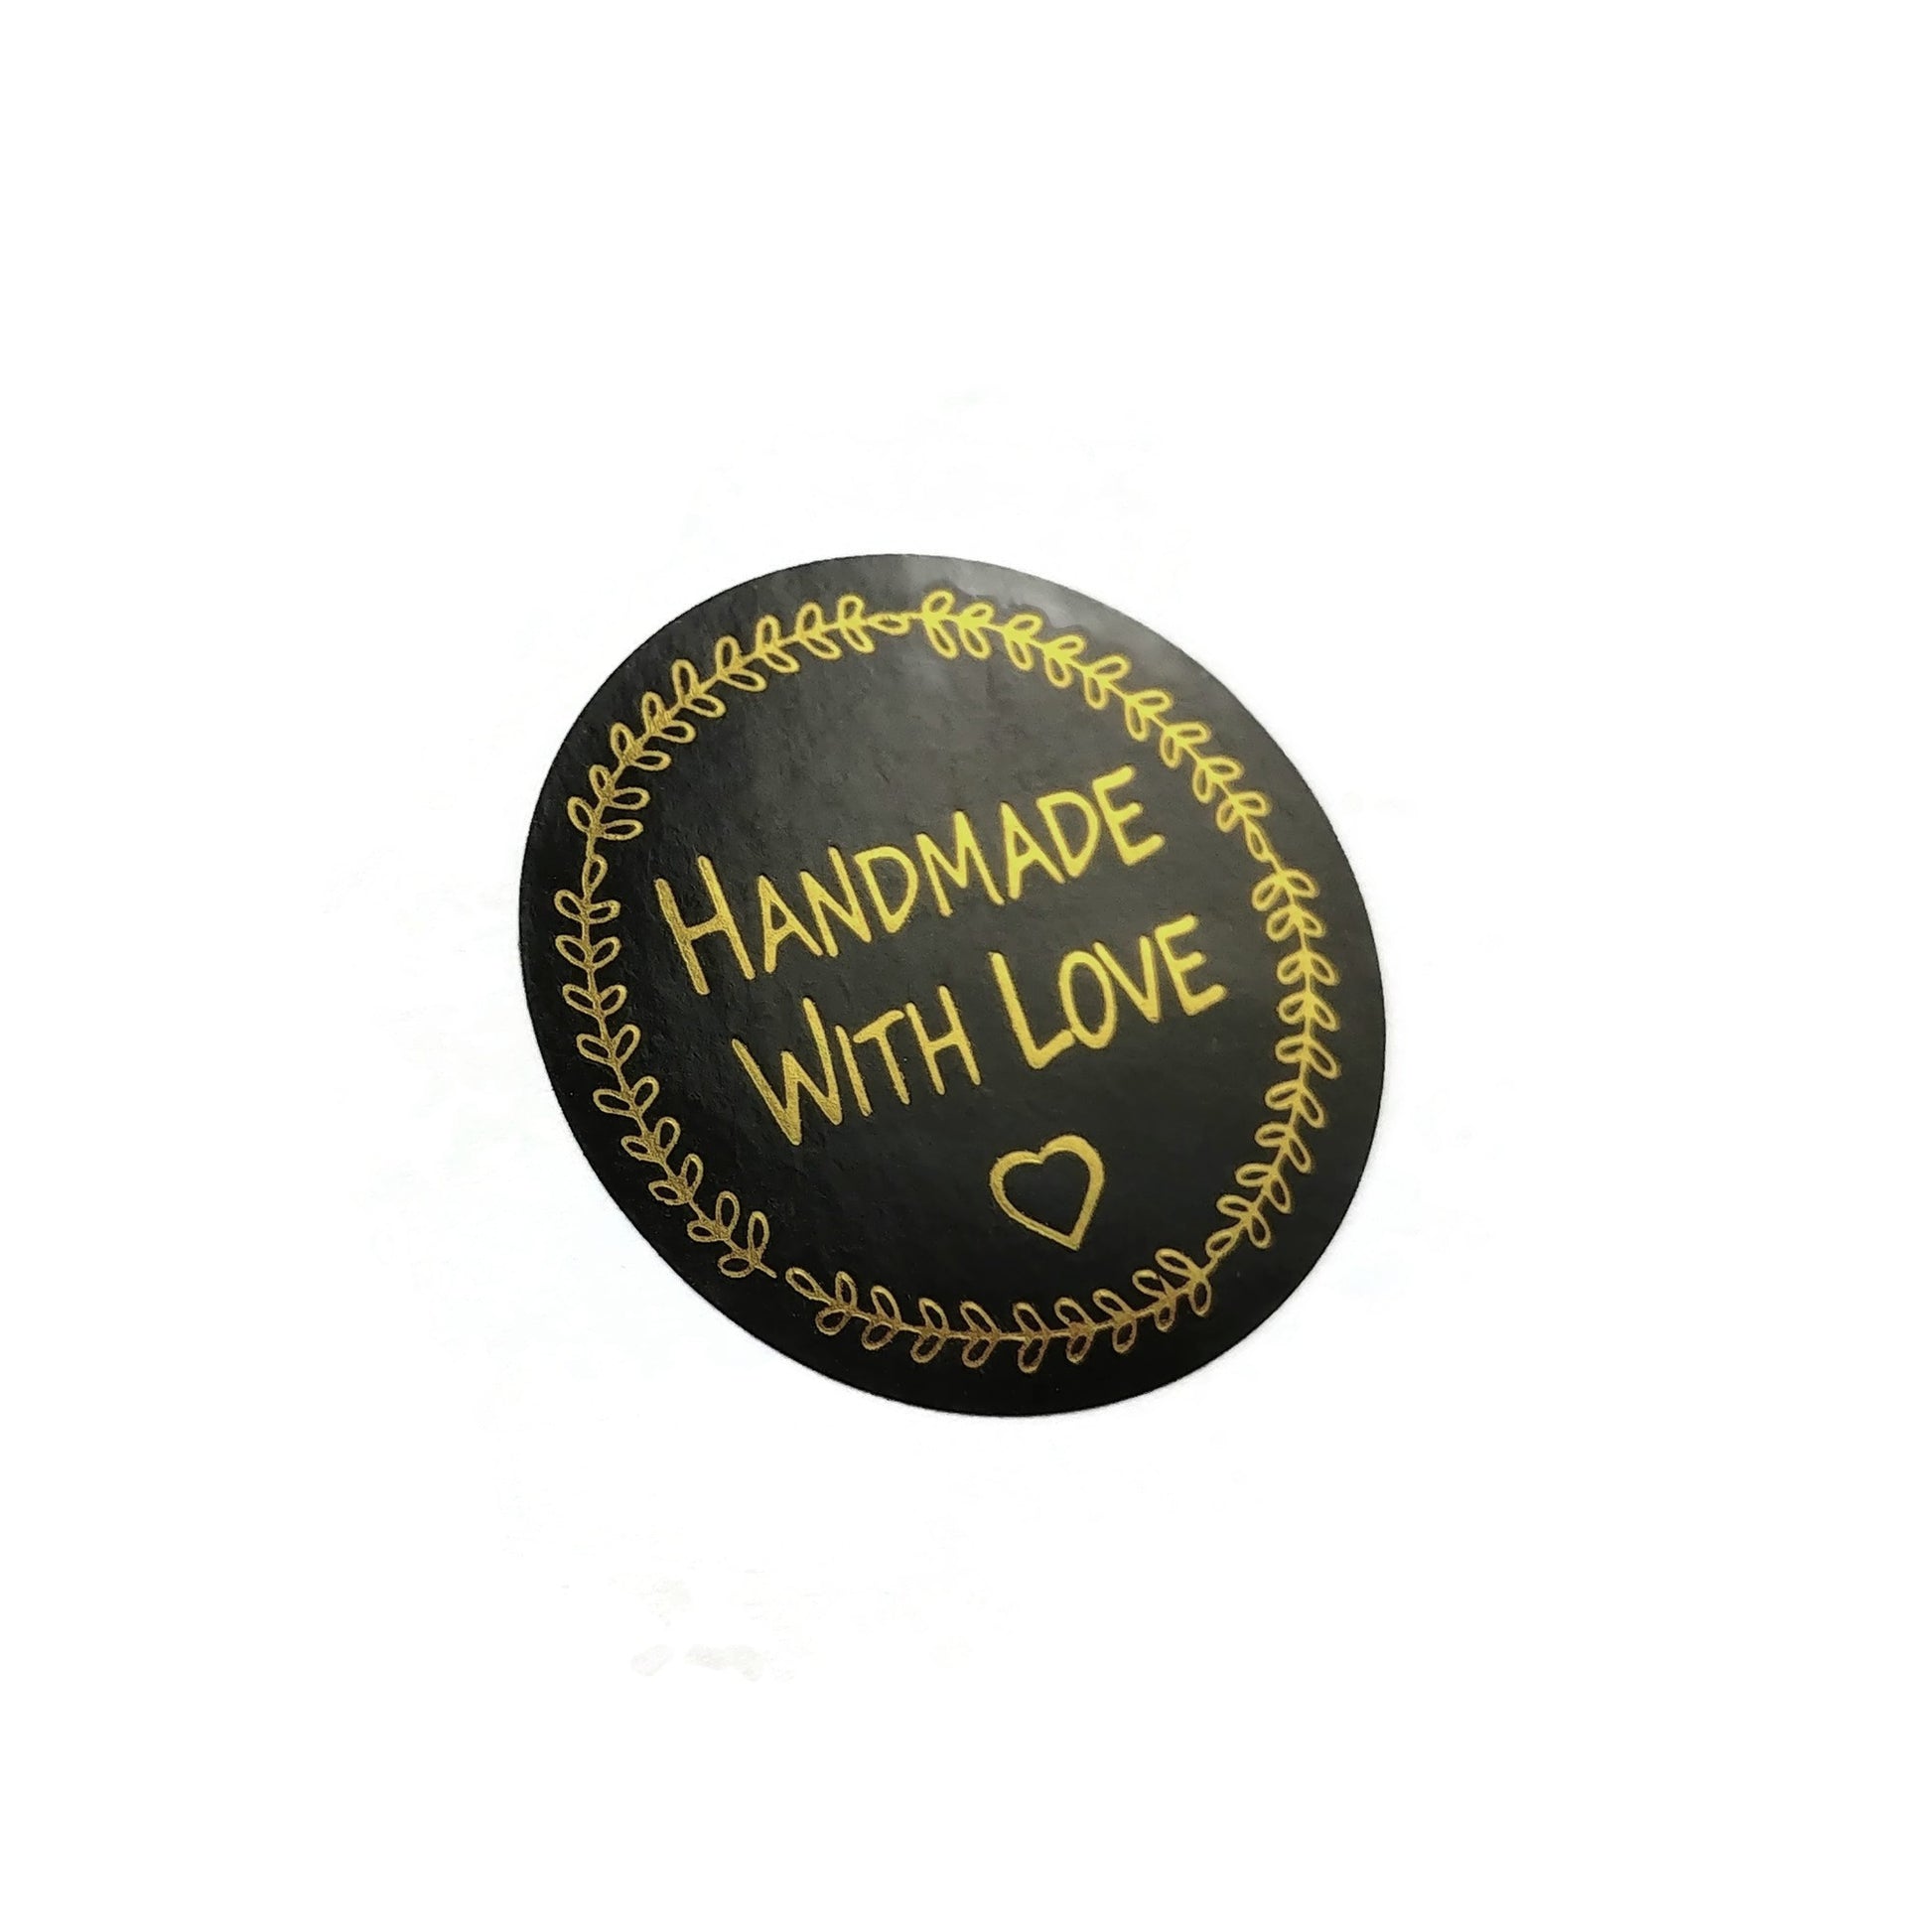 50 Handmade with love stickers